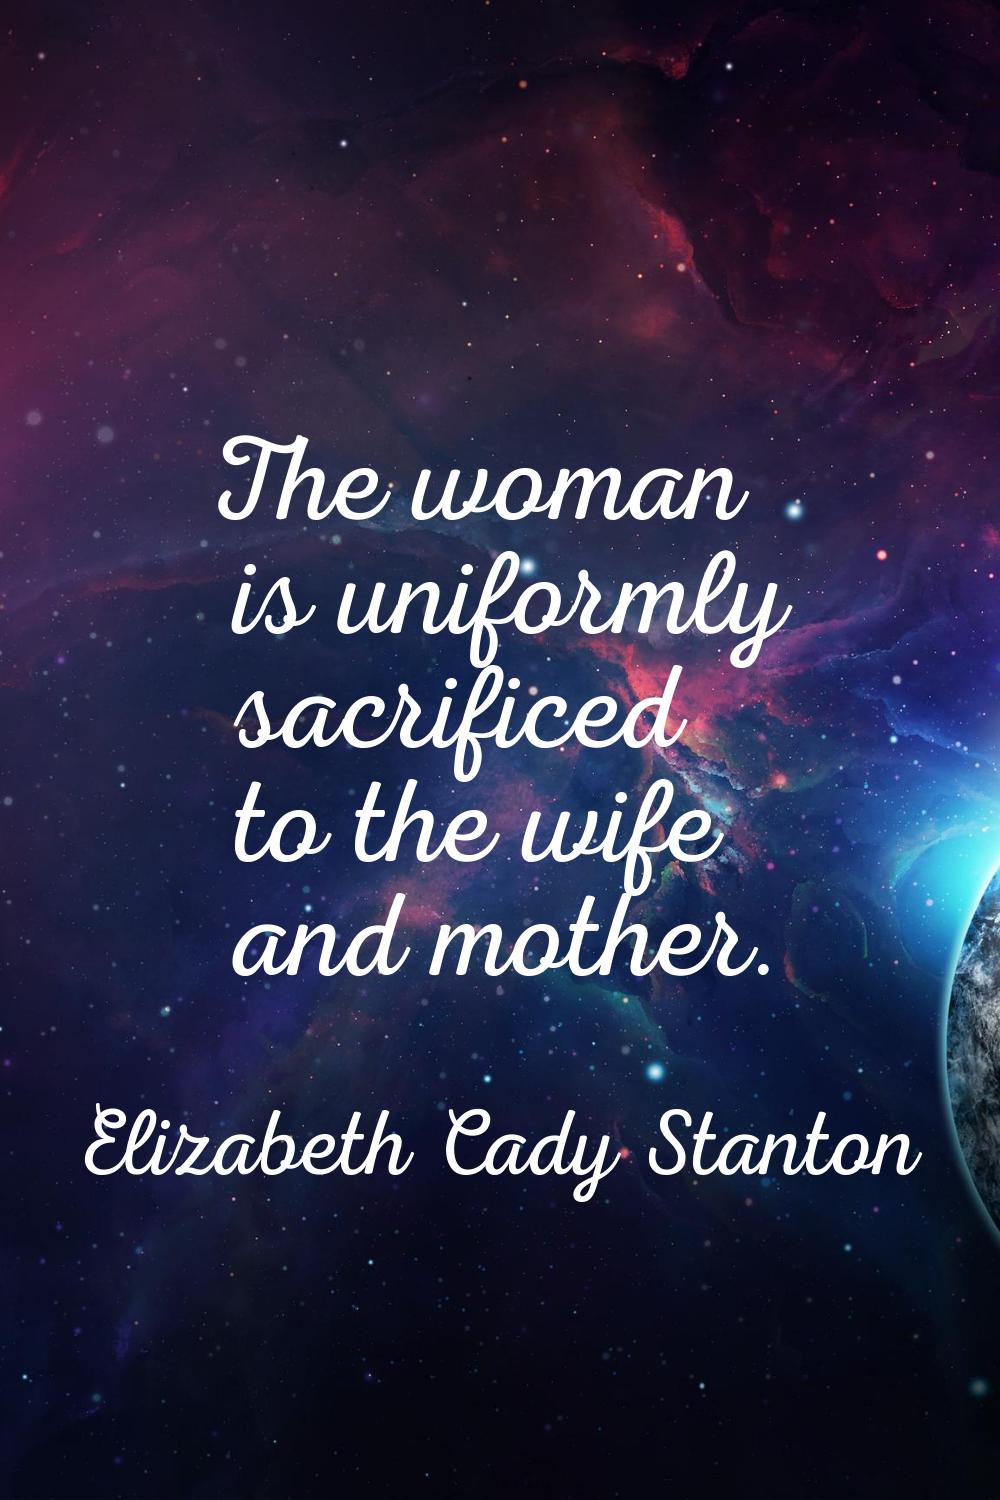 The woman is uniformly sacrificed to the wife and mother.